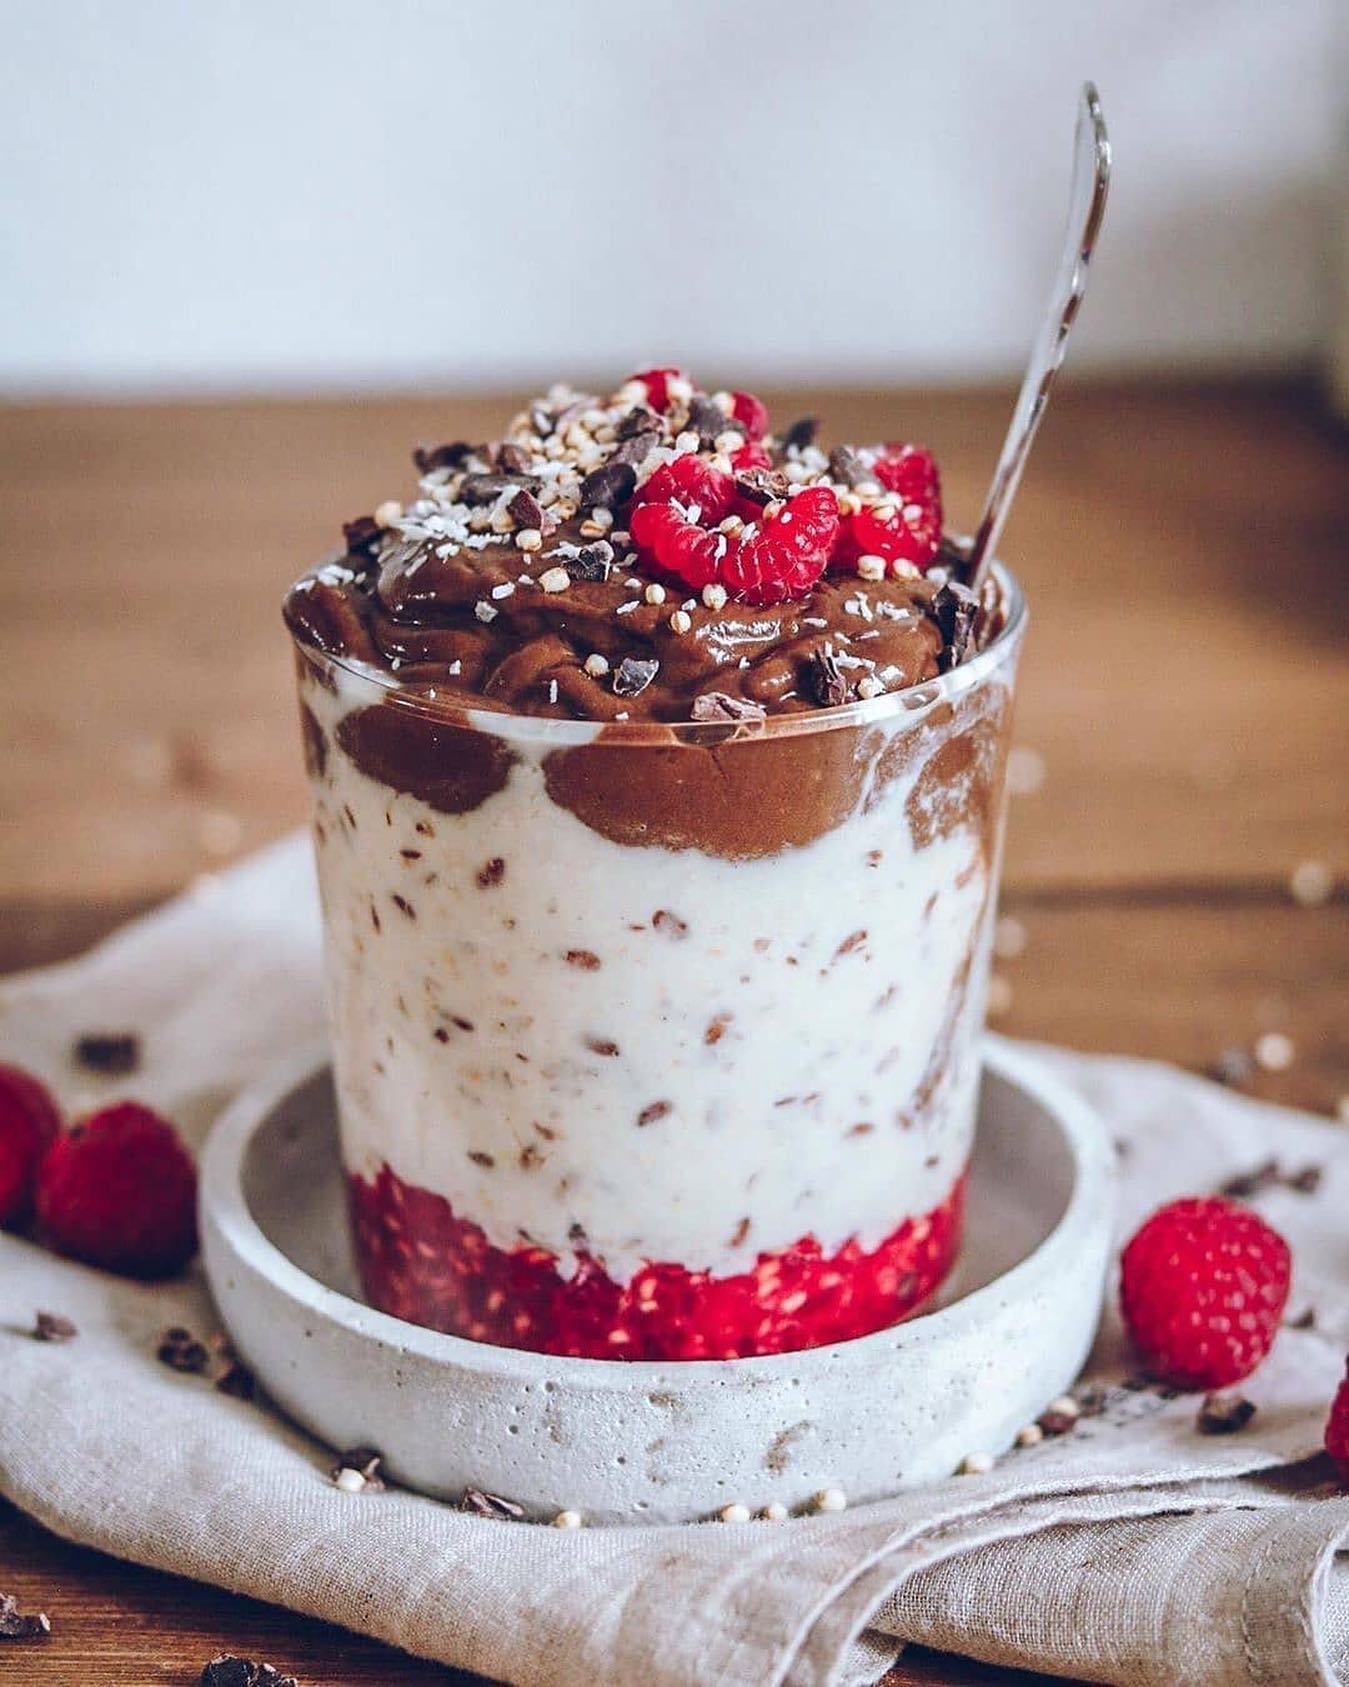 Follow @smoothies_nature365 • @detox_recipes Also check @foodtipz . Getting those healthy fats in! 😍 Classic oatmeal topped with my all time favorite chocolate mousse, coconut yogurt and raspberries. Classic flax oatmeal: 5 tbsp rolled oats 1 tbsp flax seeds 3/4 cup hot water 3/4 cup oat milk 1/2 tbsp maple syrup Pinch of salt In a pan combine the oats and flax seeds, pour the hot water and let soak for 10 minutes. Add all the other ingredients, stir well, bring to boil and let simmer for few minutes. Top with chocolate mouse (recipe in my highlights -> chocolate bowl) and serve with coconut yogurt and raspberries . Credit: @soulfoodbysarah #befitfoods #befitrecipes #nutrition_planet #veganvultures #feedfeed #foodphotography #foodlover #foodforlife #thrivemags #flatlaytoday #deliciouslyhealthysweets #contemporaryvegan #originmagazine #veganfood #wholefoods #veganfoodspot #veganfoodshare#veganbombs #detoxtips #thevegansclub #smoothiemixer #healthfoods #befitsmoothies #kaylaitsines #smoothie_planet #beautifulsmoothies #glowingplants #strawberrymousse #veganmousse #vegandessert